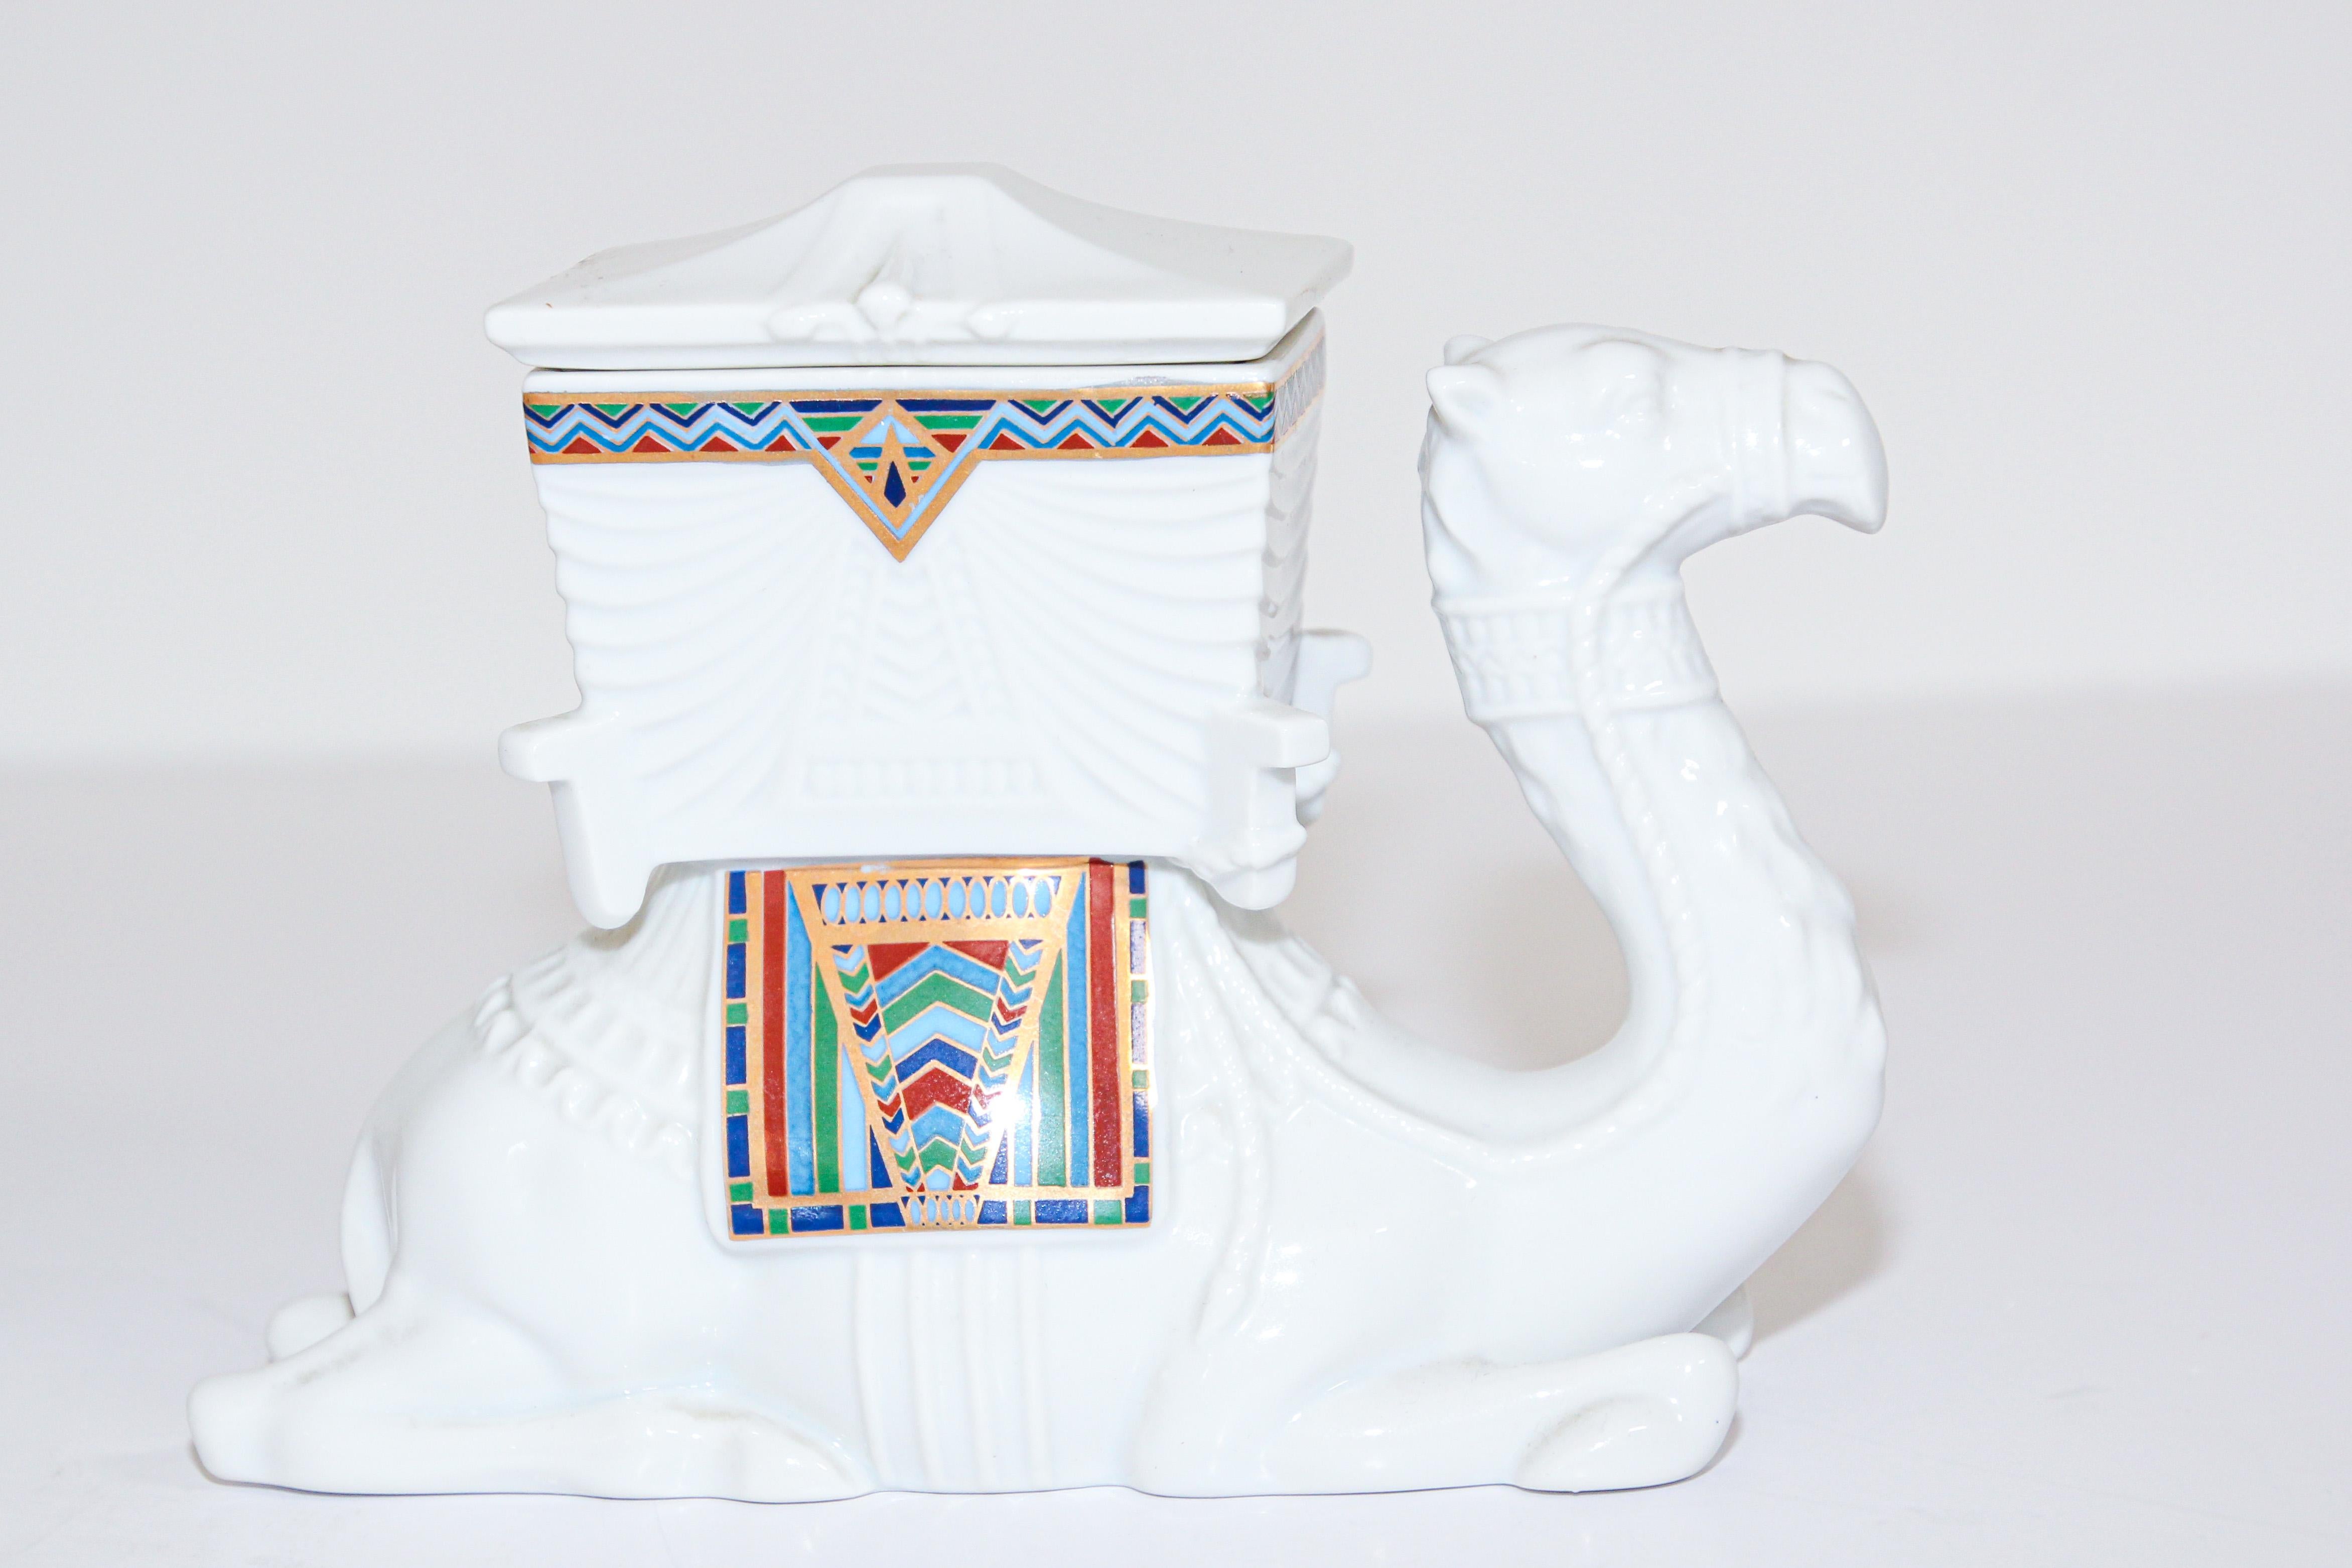 Hand-Crafted Treasures of the Pharaohs Porcelain Royal Camel by Elizabeth Arden